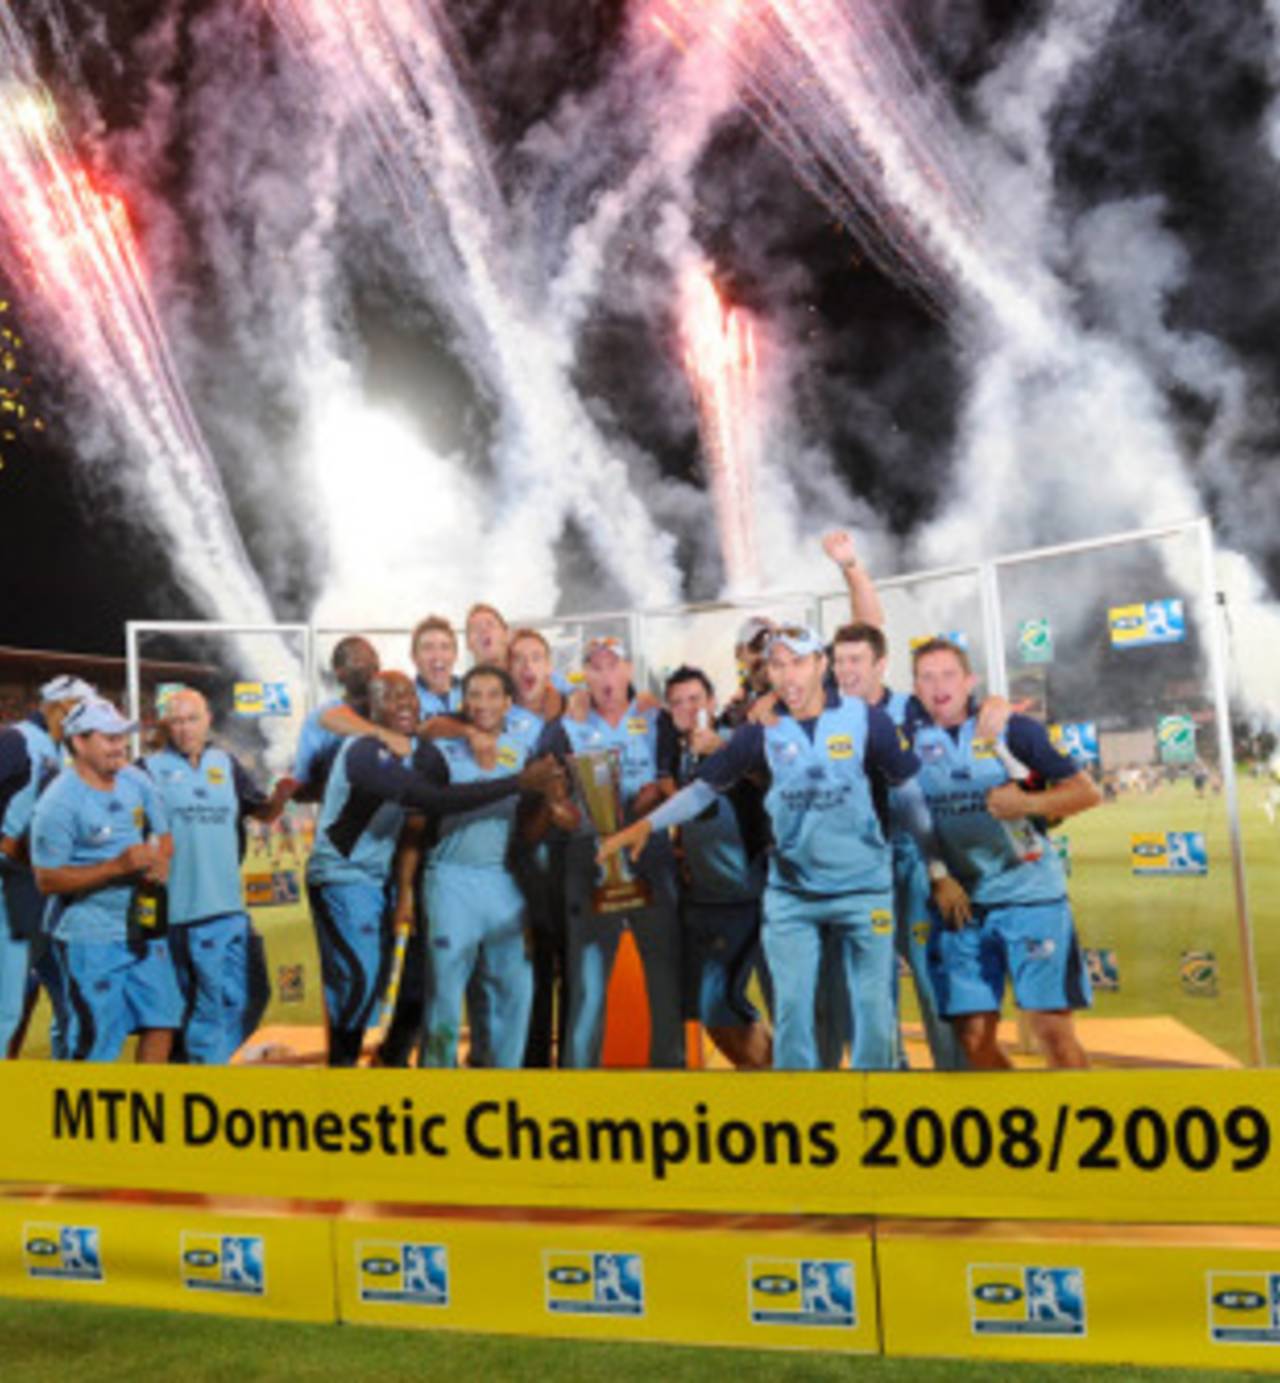 The Titans won the MTN Domestic Championship last year, but the format might soon change&nbsp;&nbsp;&bull;&nbsp;&nbsp;Cricket South Africa